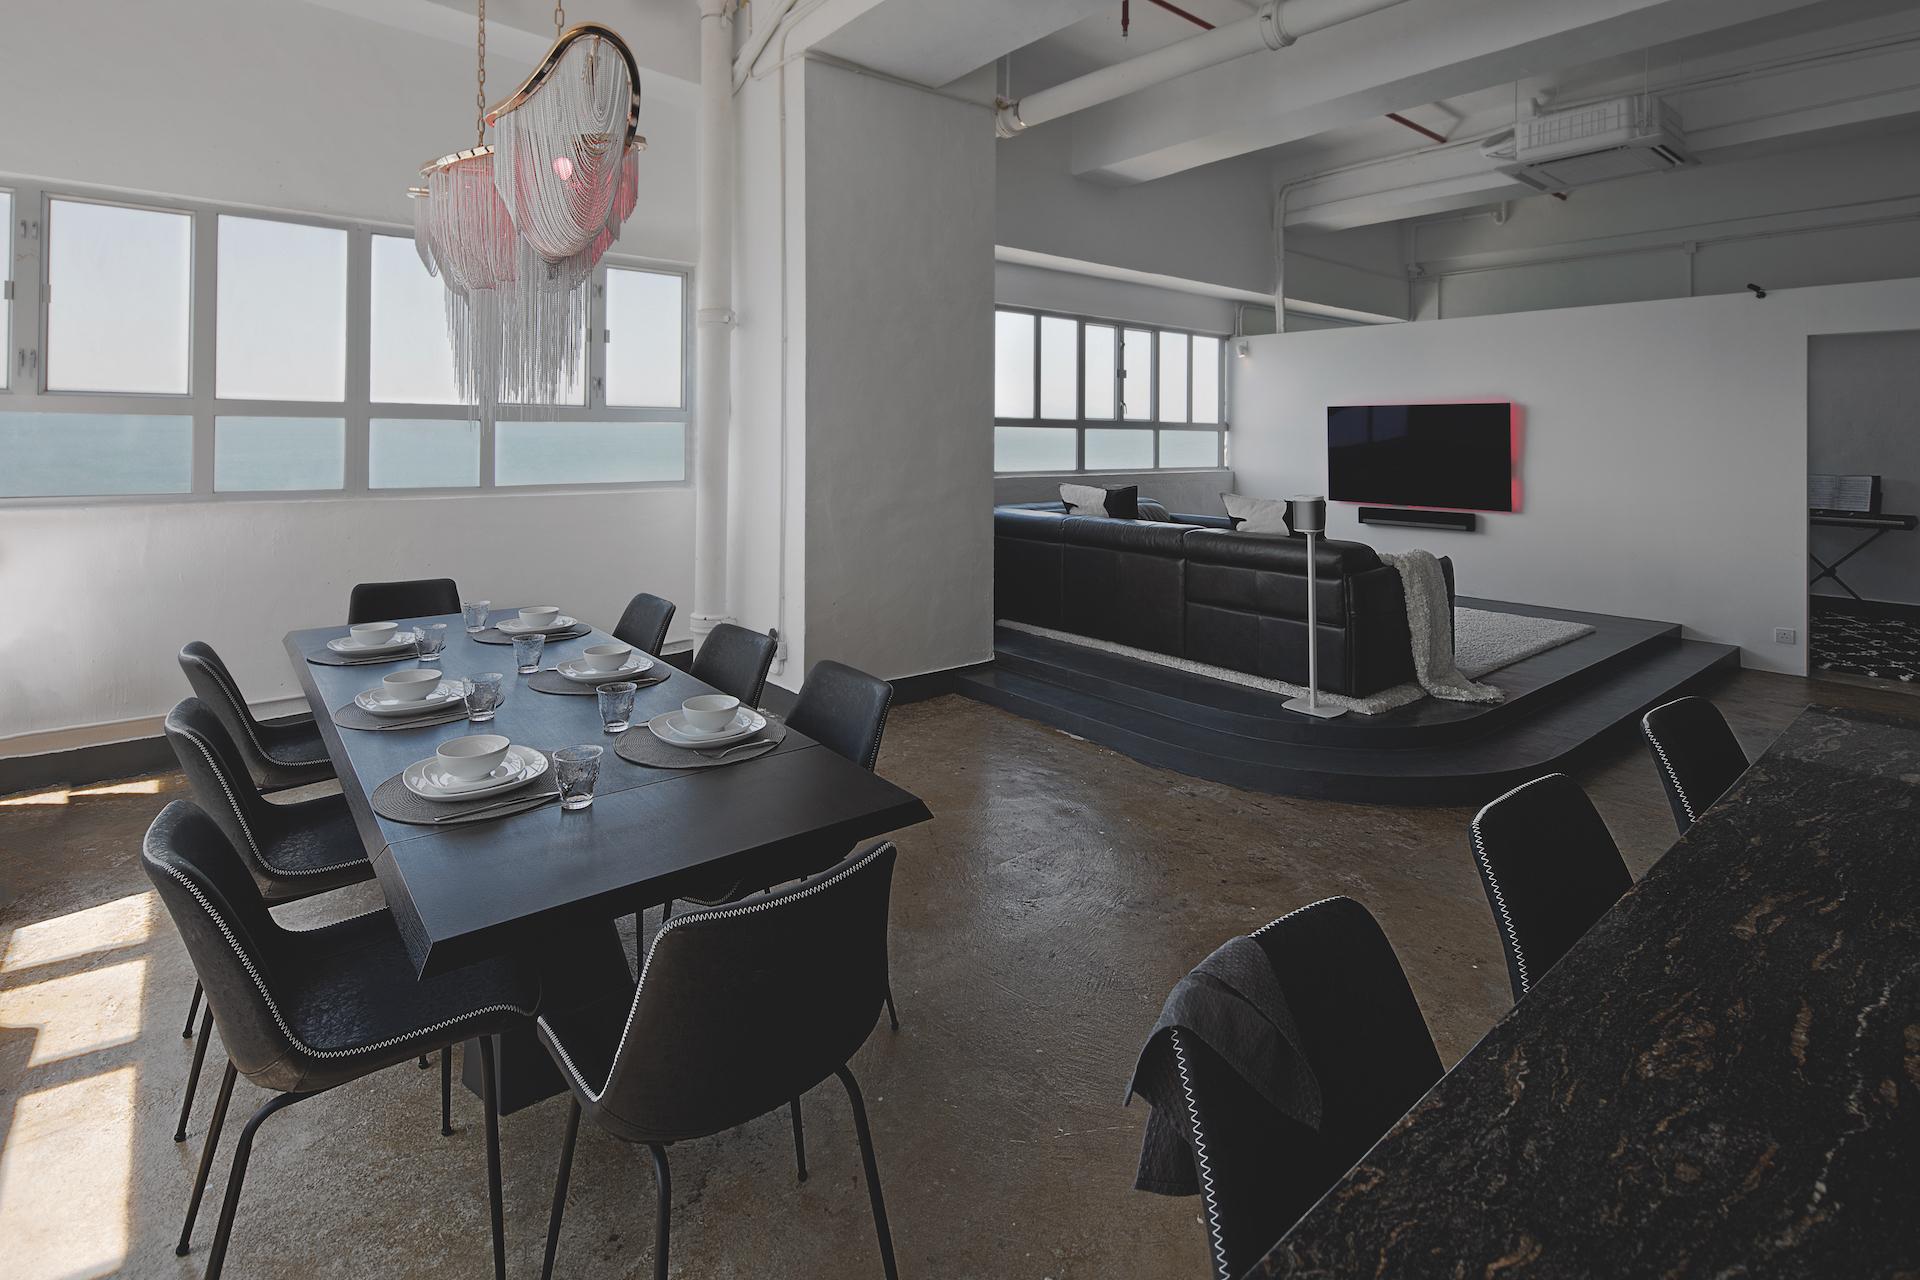 The Transformation of a Pok Fu Lam Industrial Building Flat into a Stylish Office-Cum-Residence